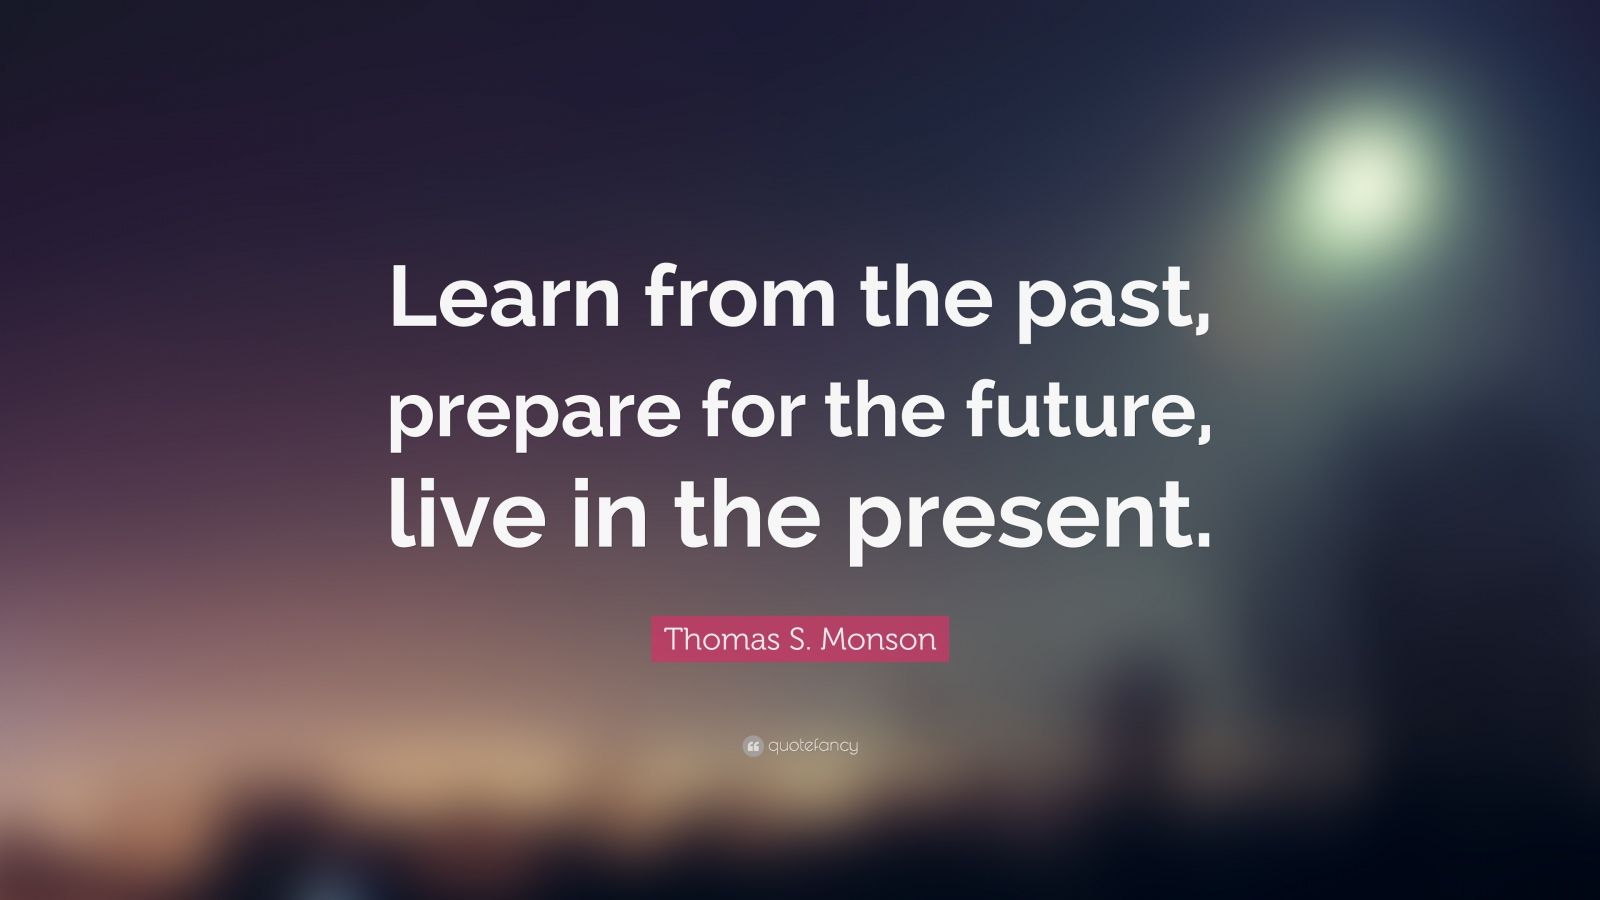 Thomas S. Monson Quote: “Learn from the past, prepare for the future